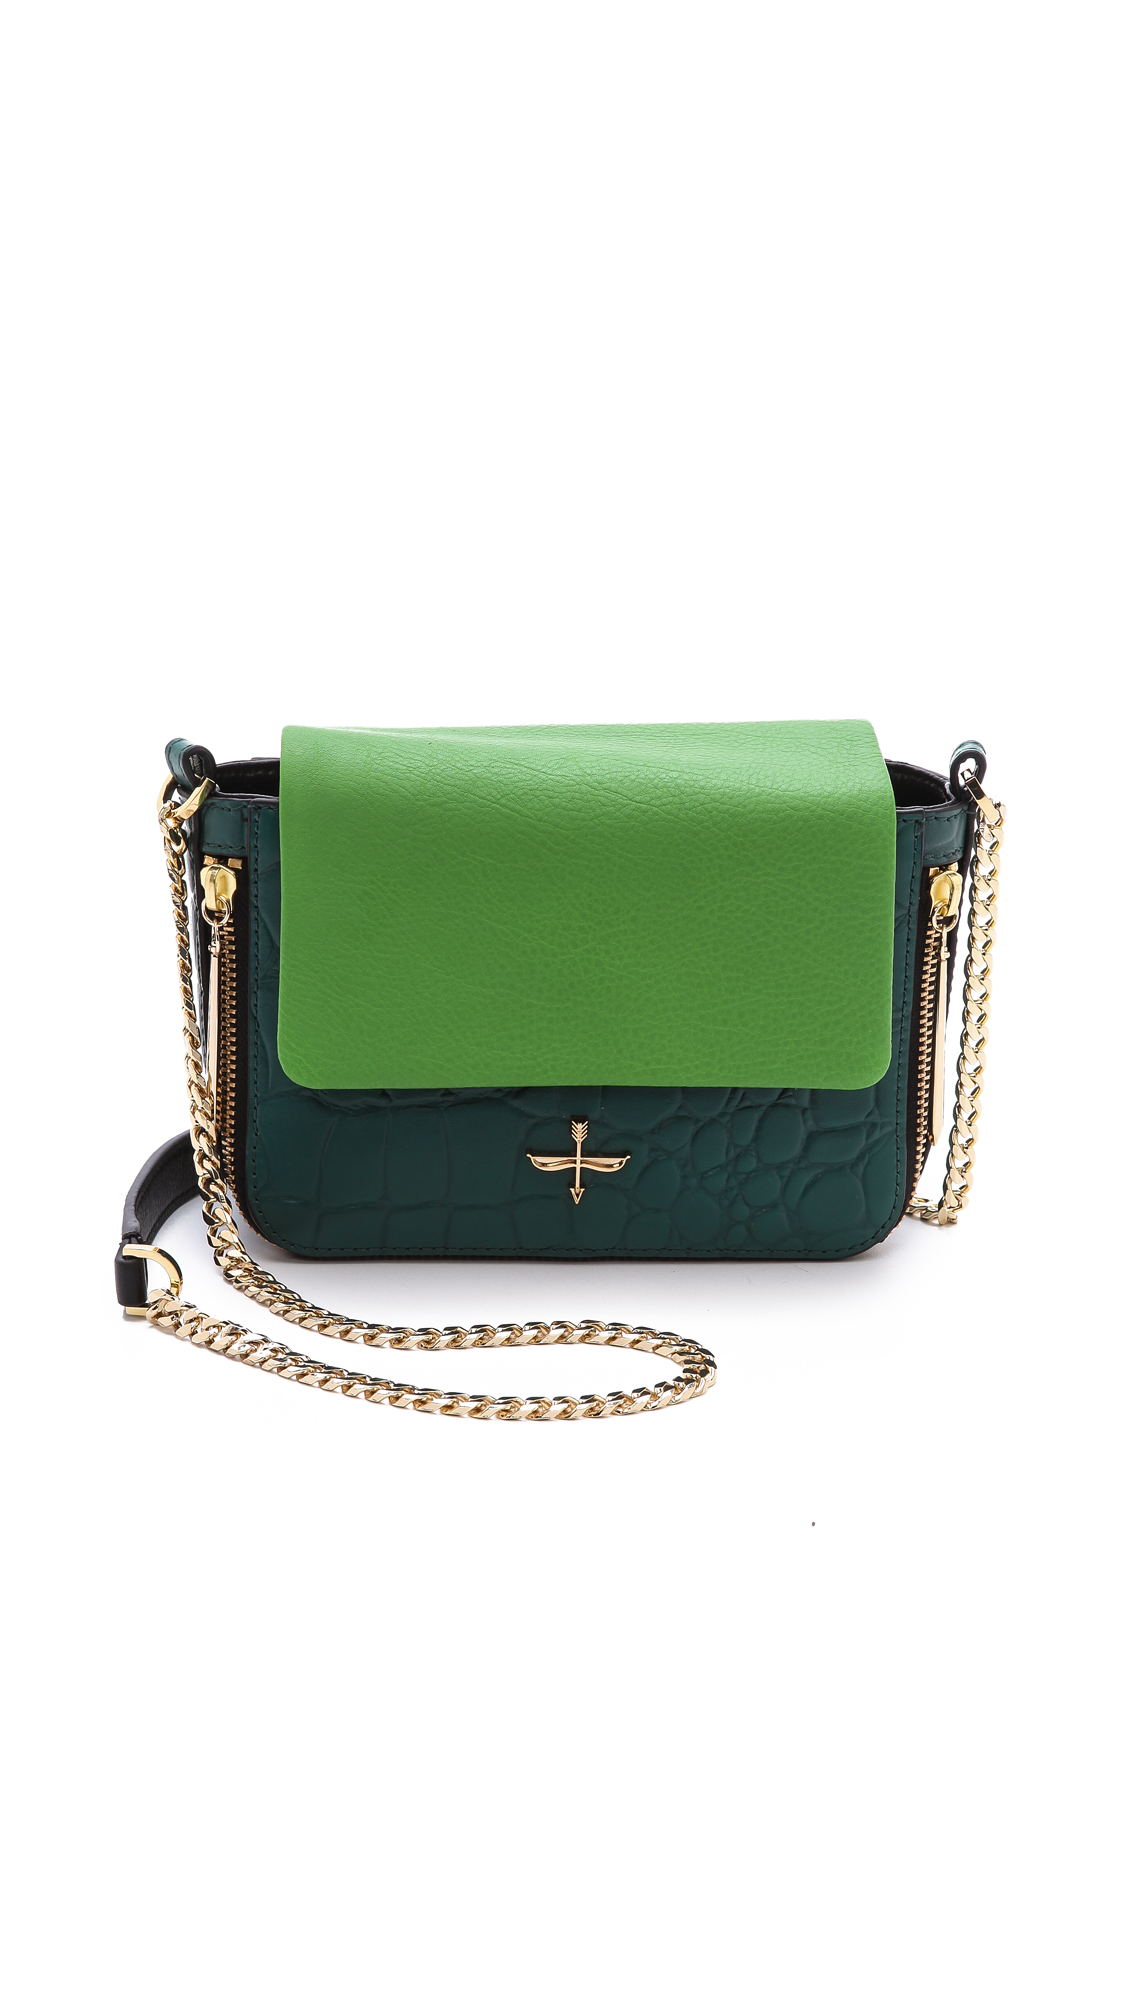 Pour La Victoire Yves Alsace Cross Body Bag in Green - Lyst